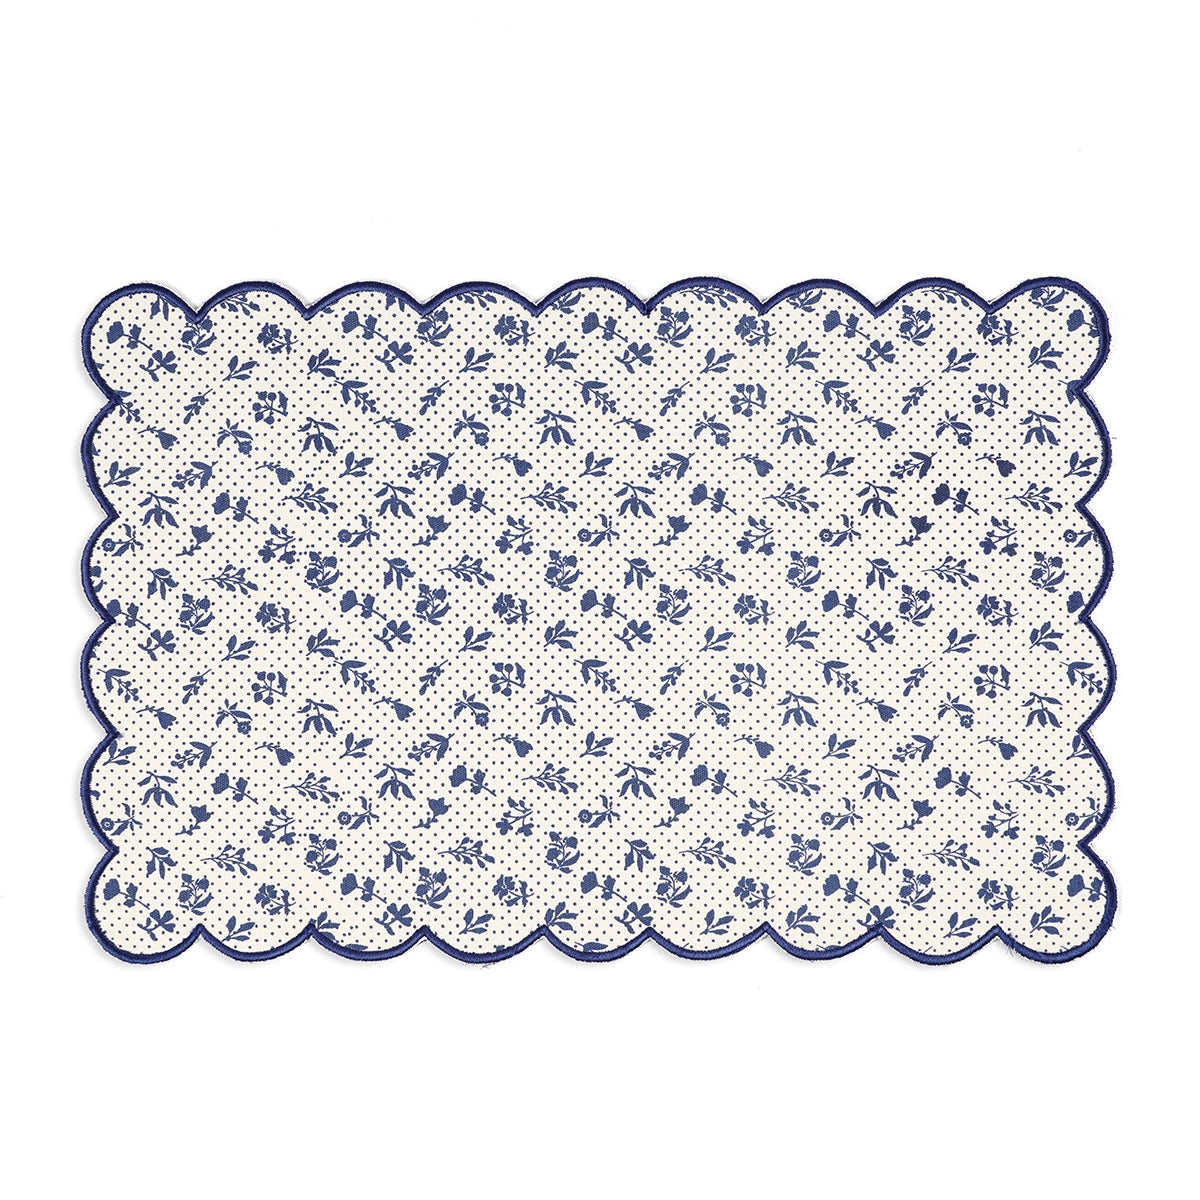 Indigo Blue scalloped cotton Placemat with floral block print , 13X19 inches